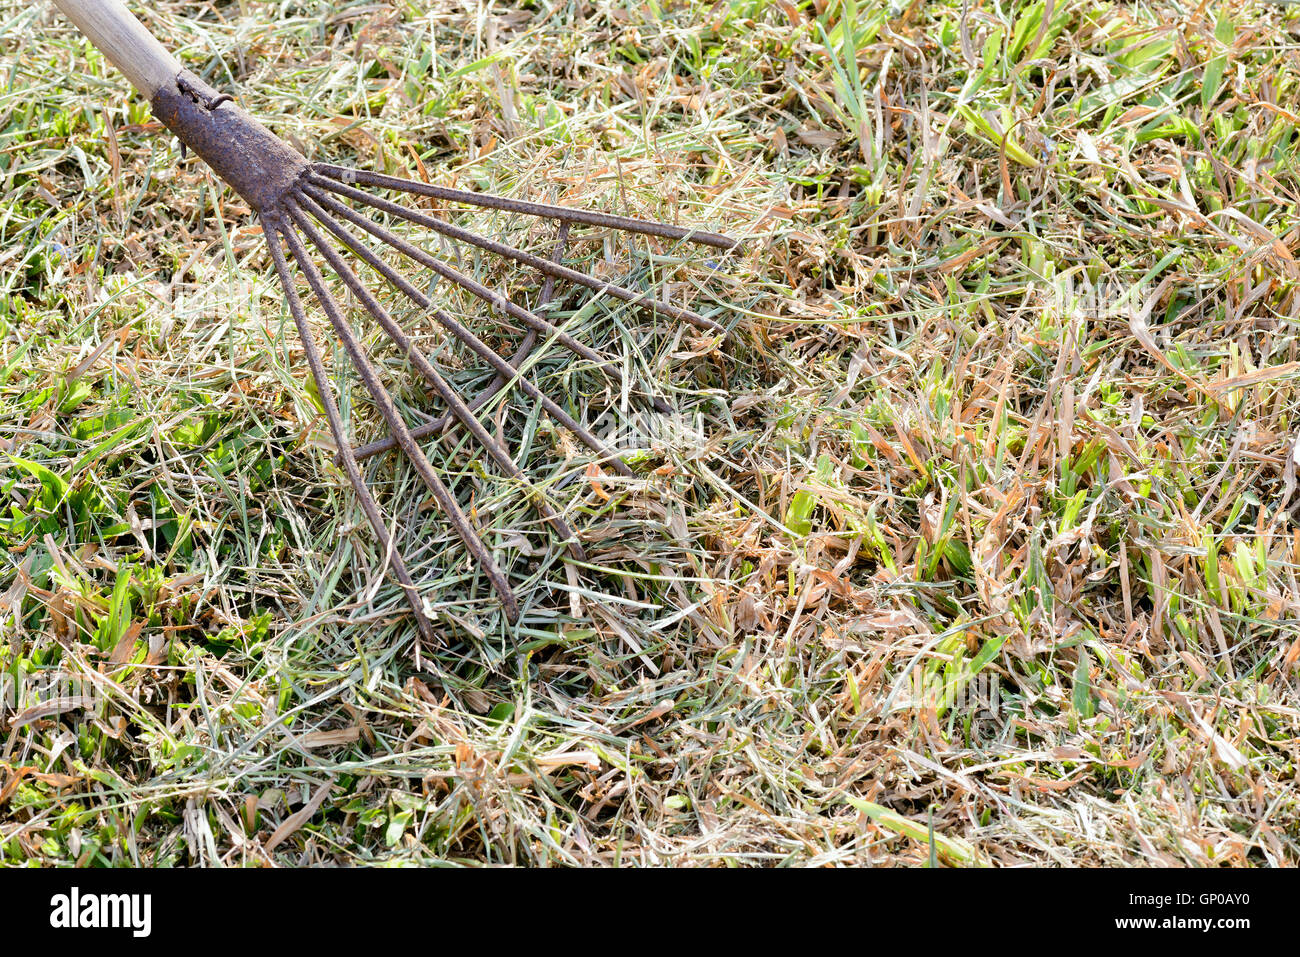 old metal rake on a wooden stick, collecting grass clippings, garden tools. Stock Photo